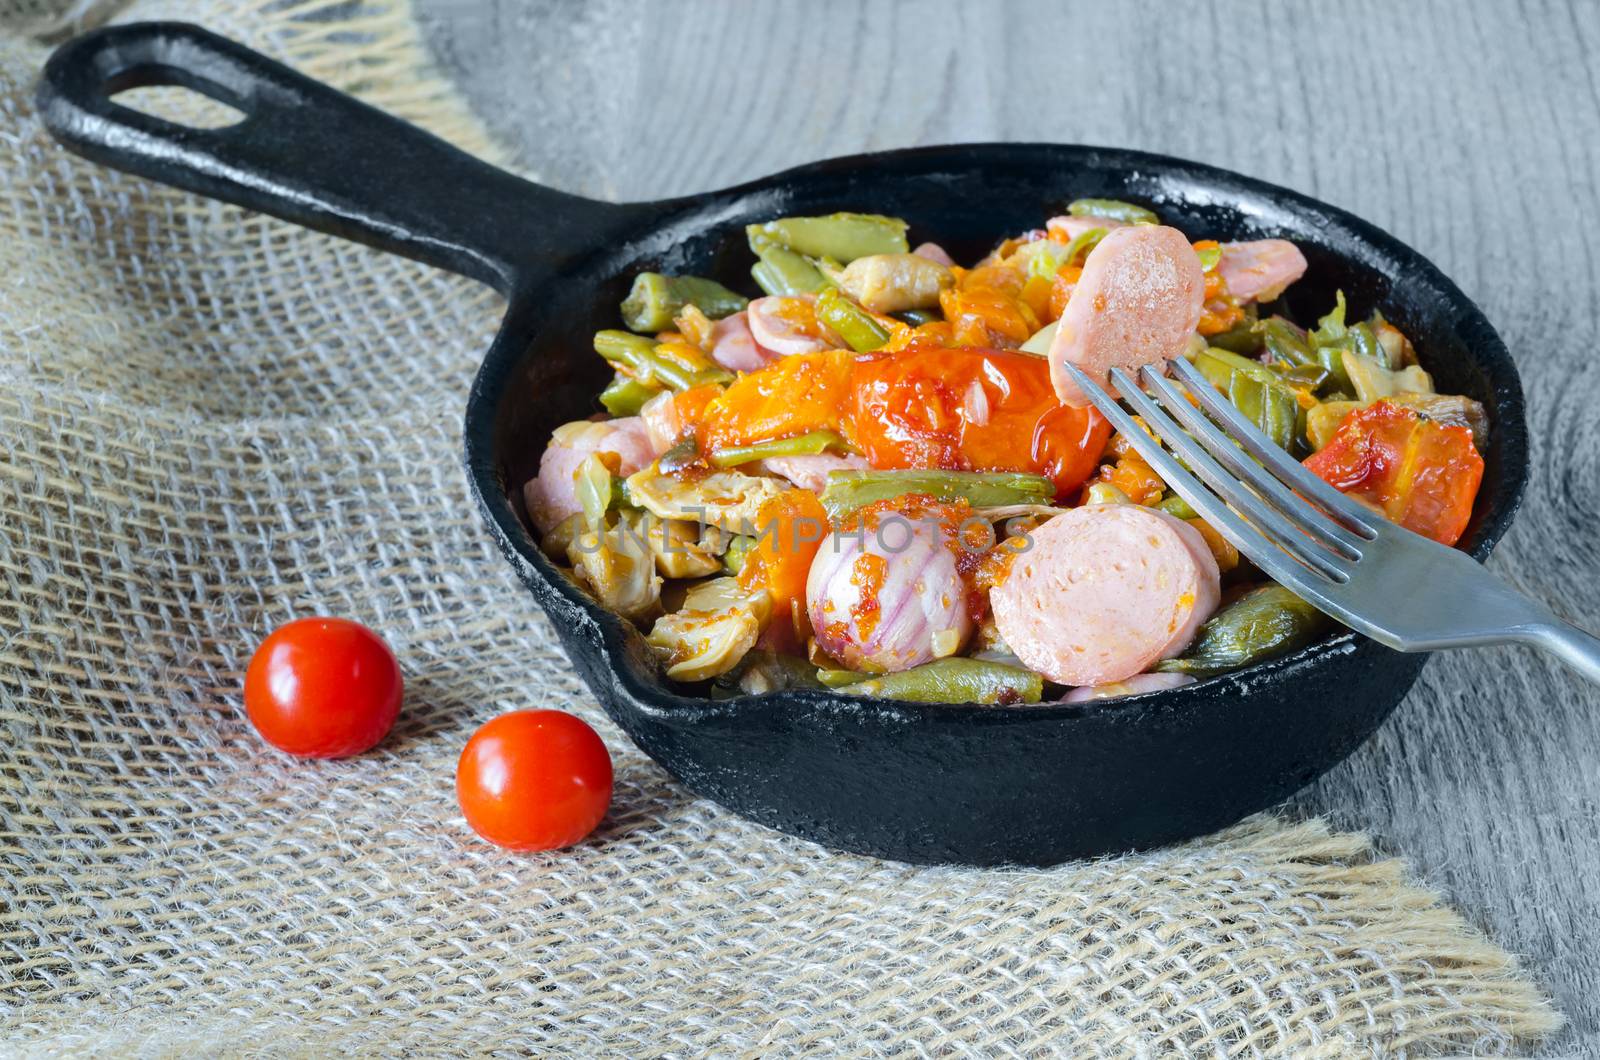 Fried vegetables with chopped sausage in a cast iron pan, a piece on a fork. Gray wood background, burlap and selective focus.